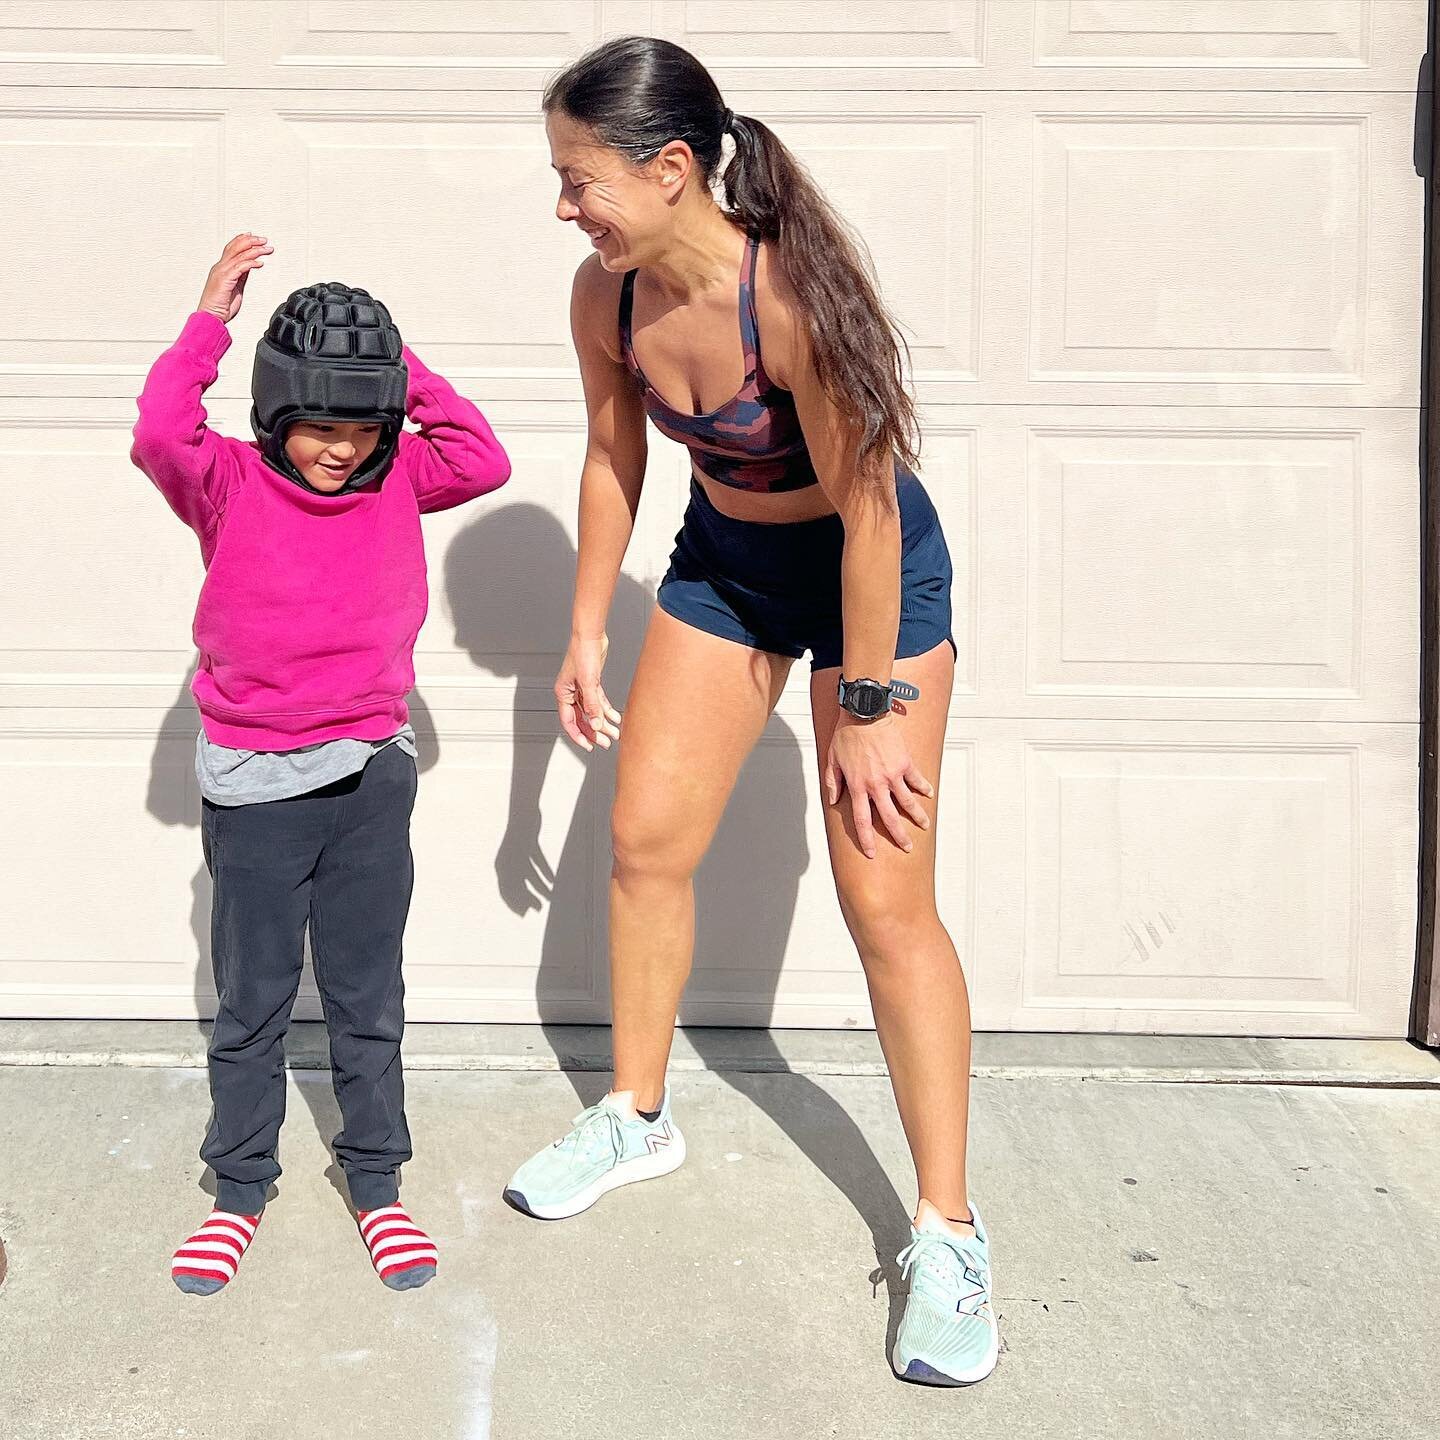 Mid morning run with my best running partner.  Sun was shining, temp was warm (50 degrees) and who can resist being happy when listening to Janet Jackson?!? Not to mention my new @lululemon running bra came in and couldn&rsquo;t wait to take it for a